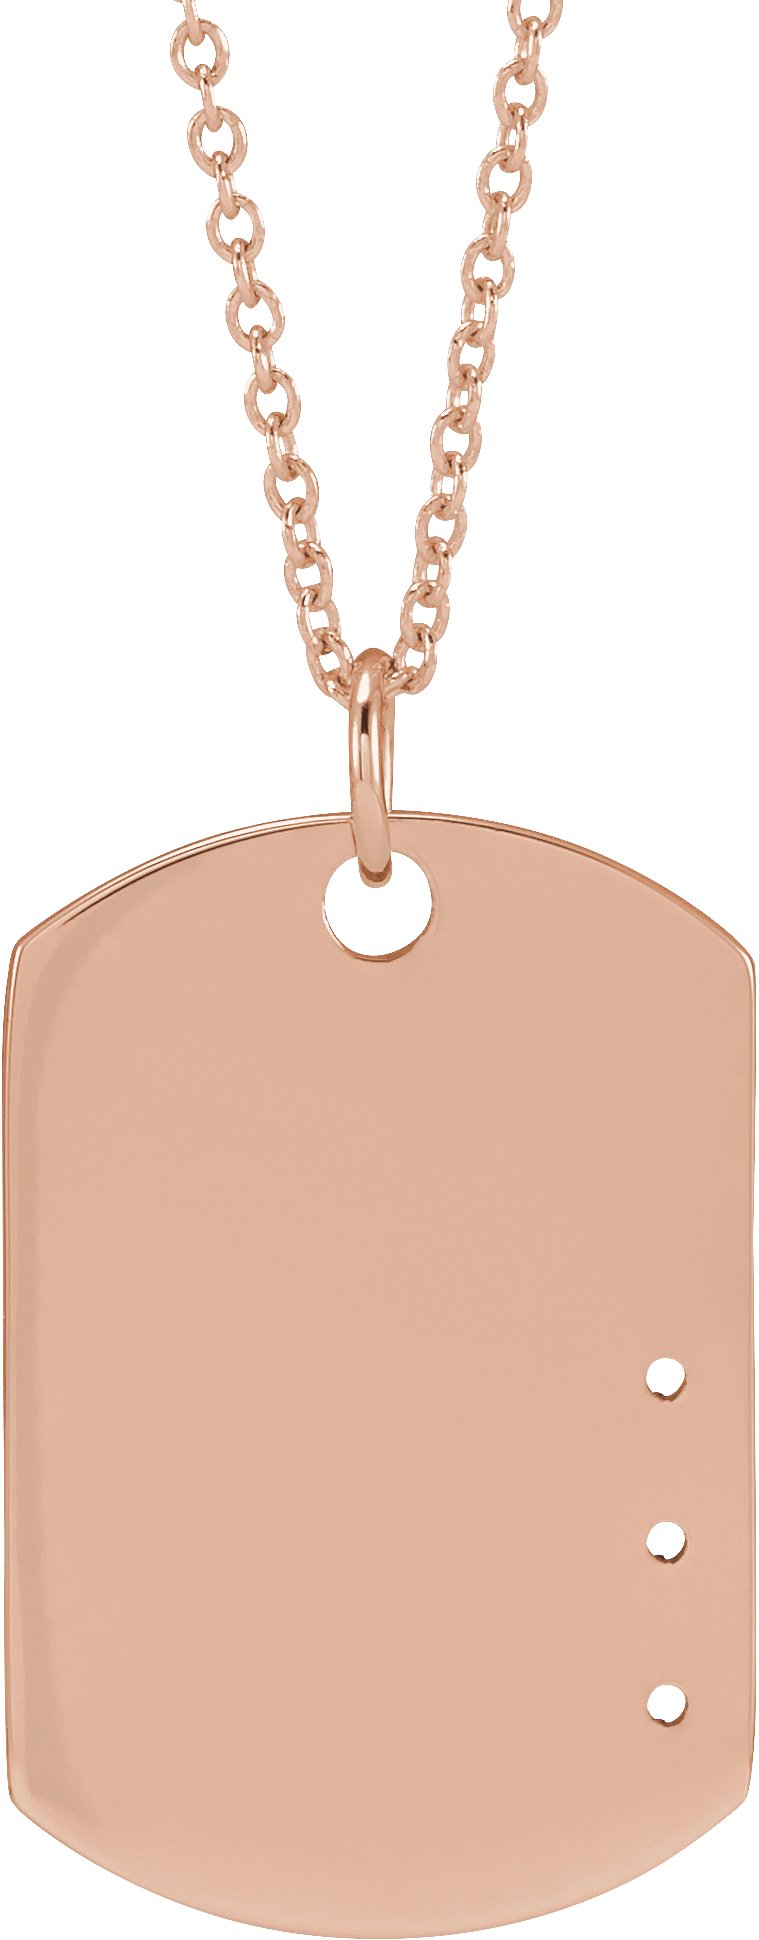 Family Engravable Necklace or Pendant